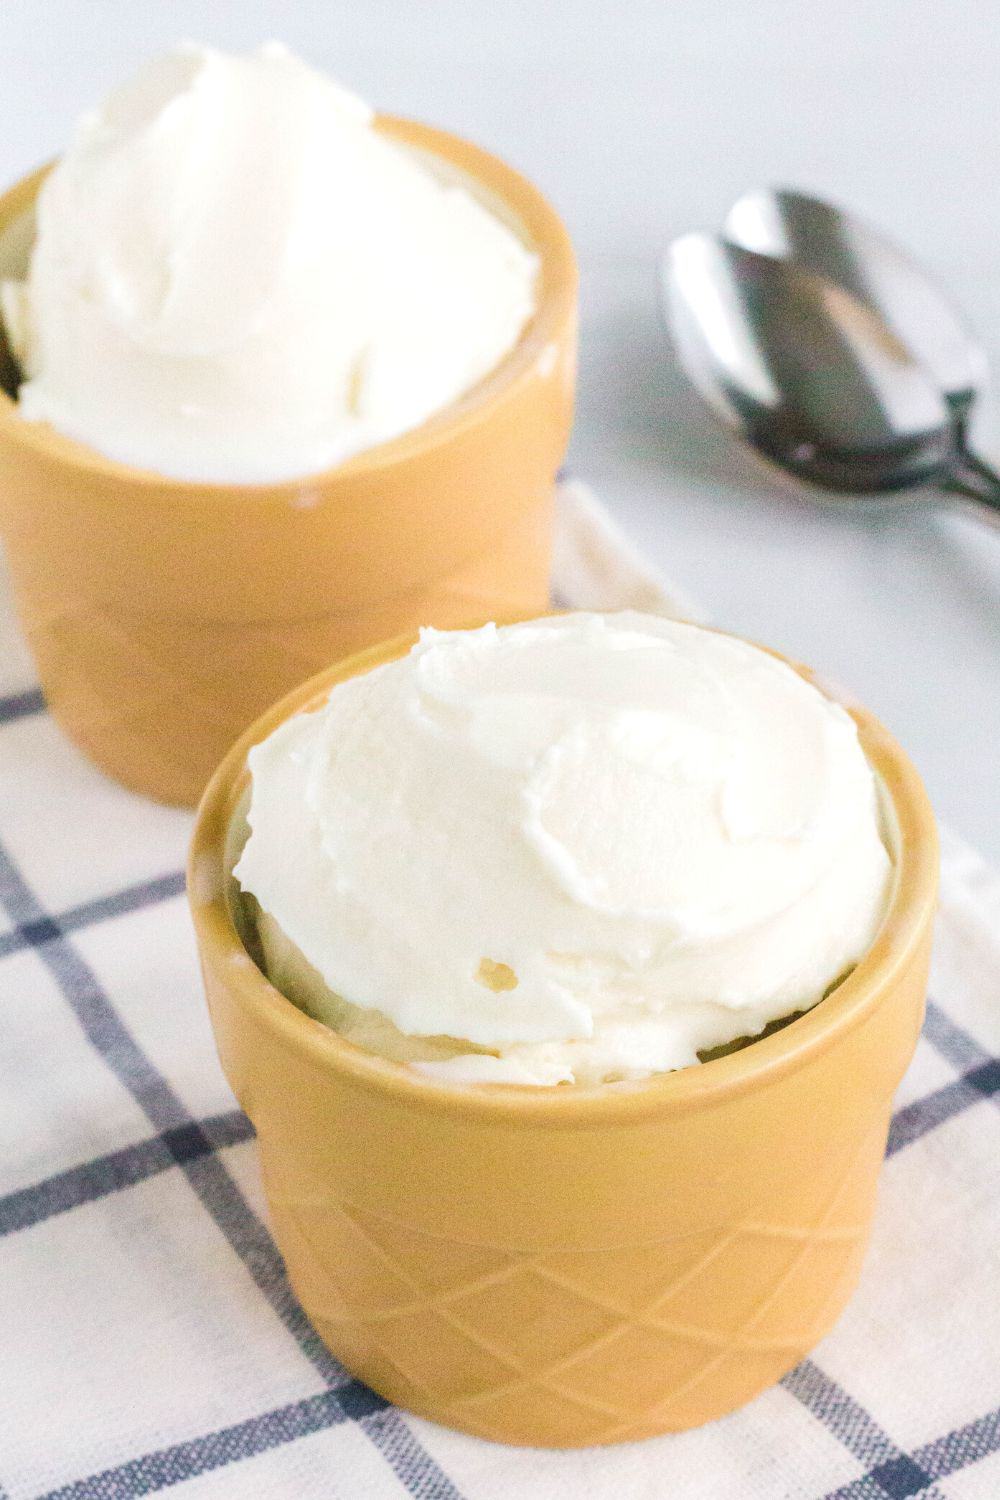 Two yellow bowls with whipped cream in them.